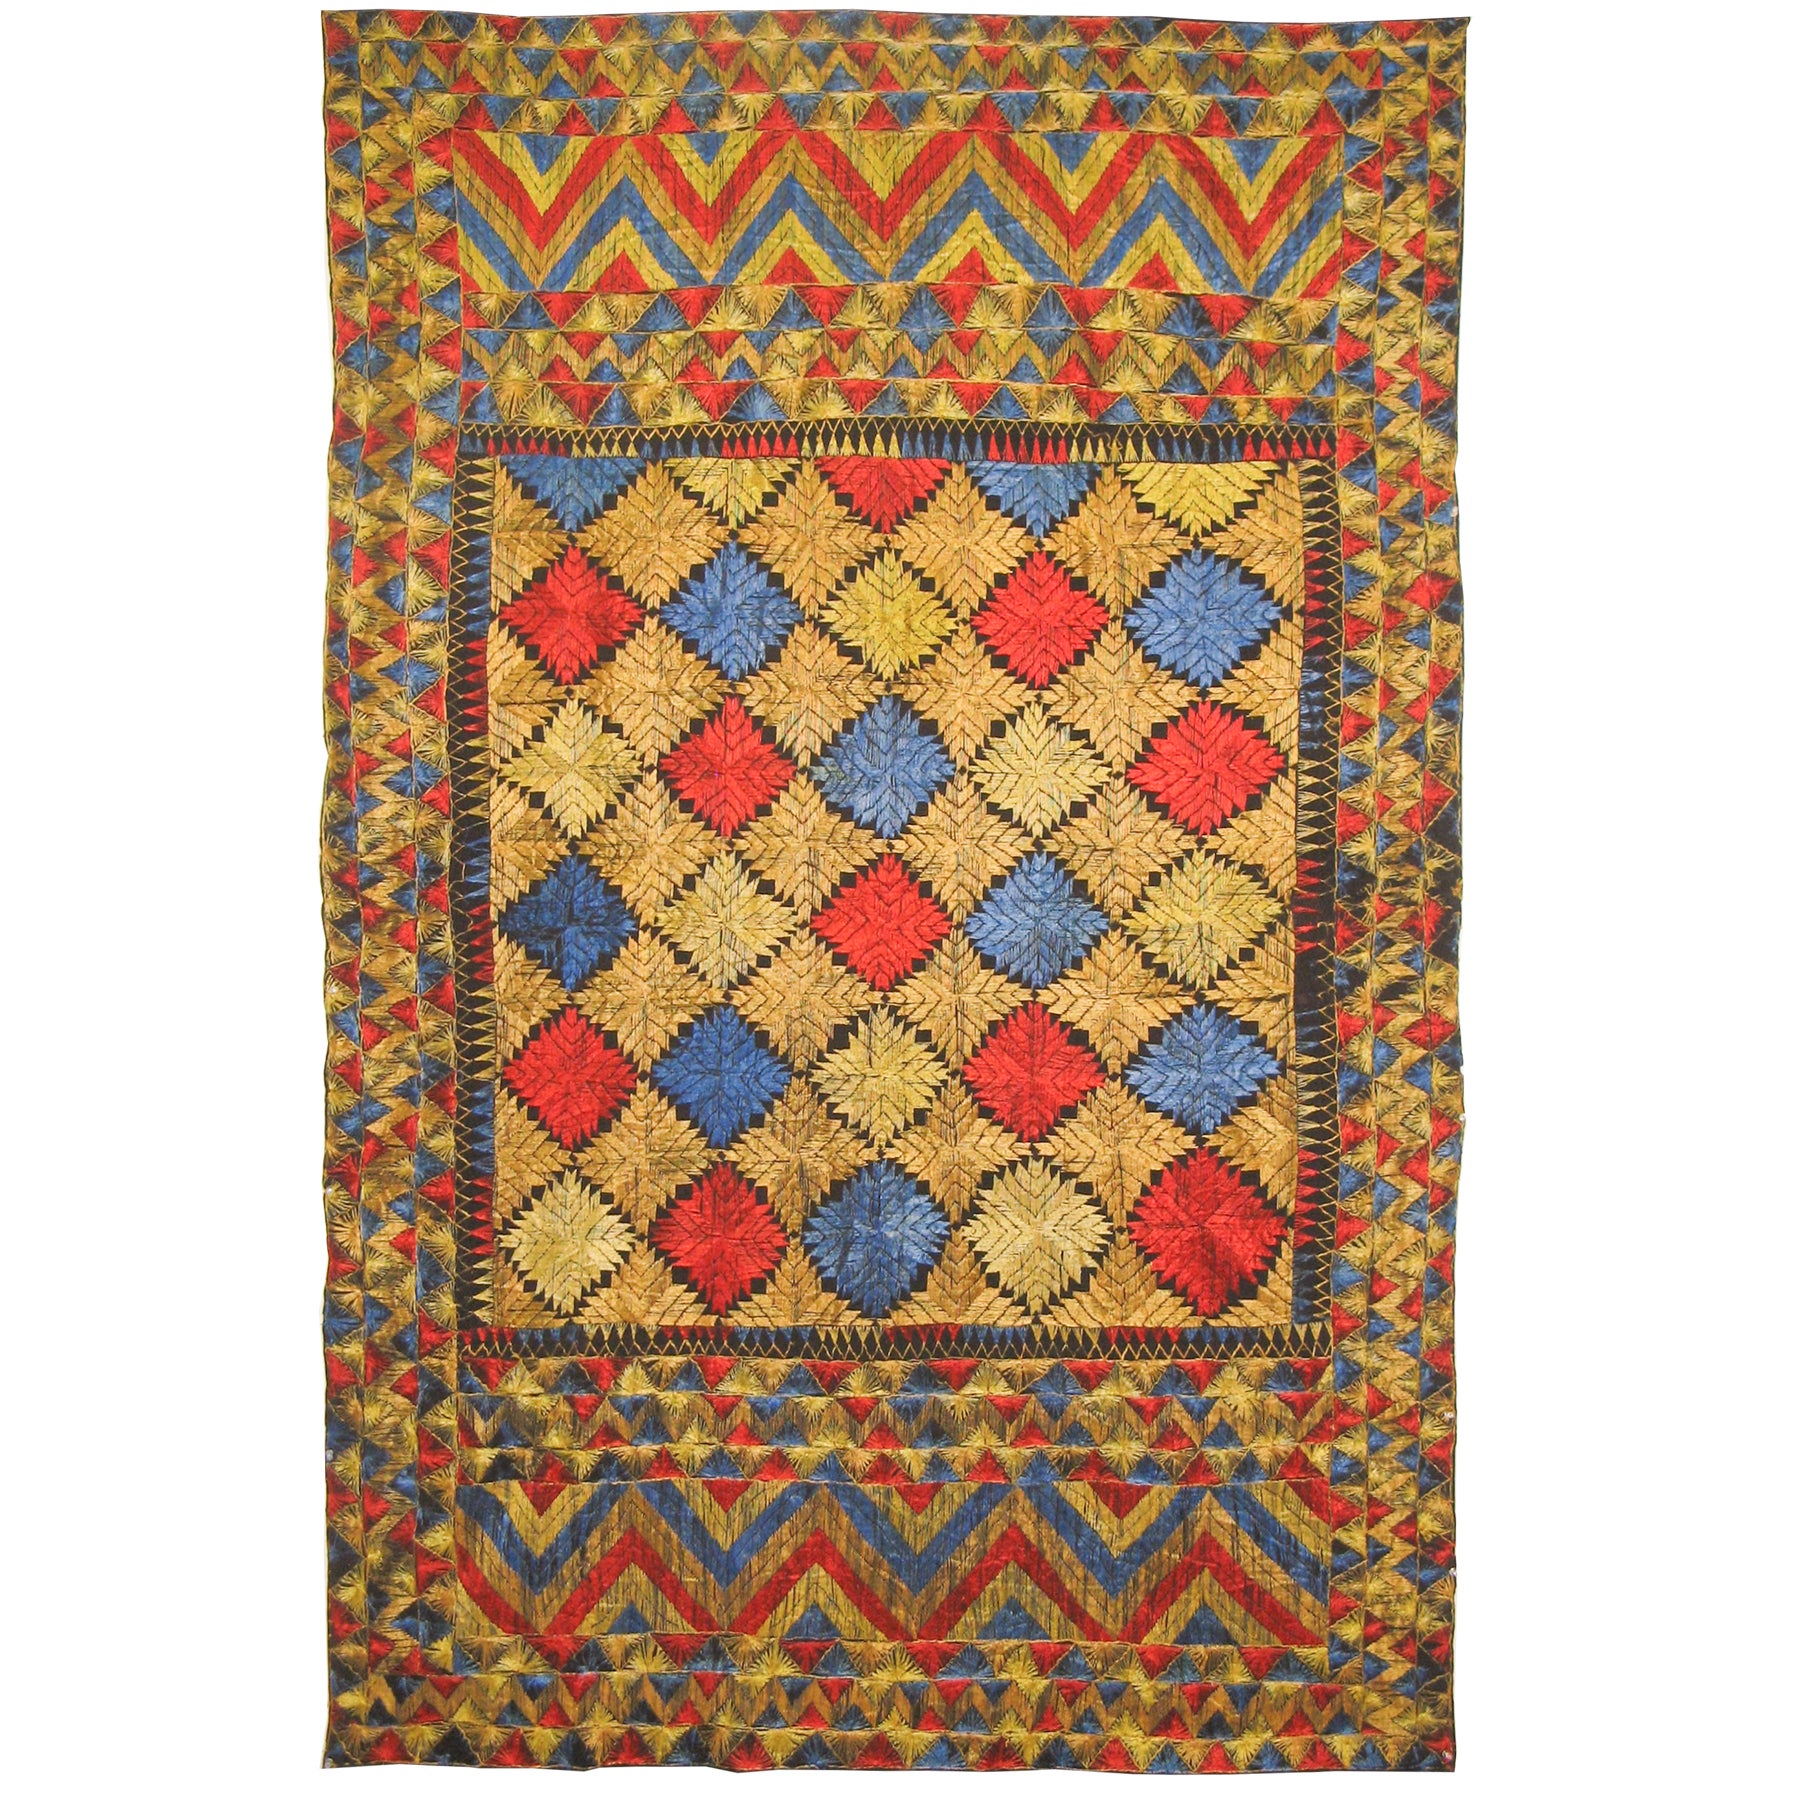 Hand Embroidered Phulkari with Silk Stitches from West India, circa 1900